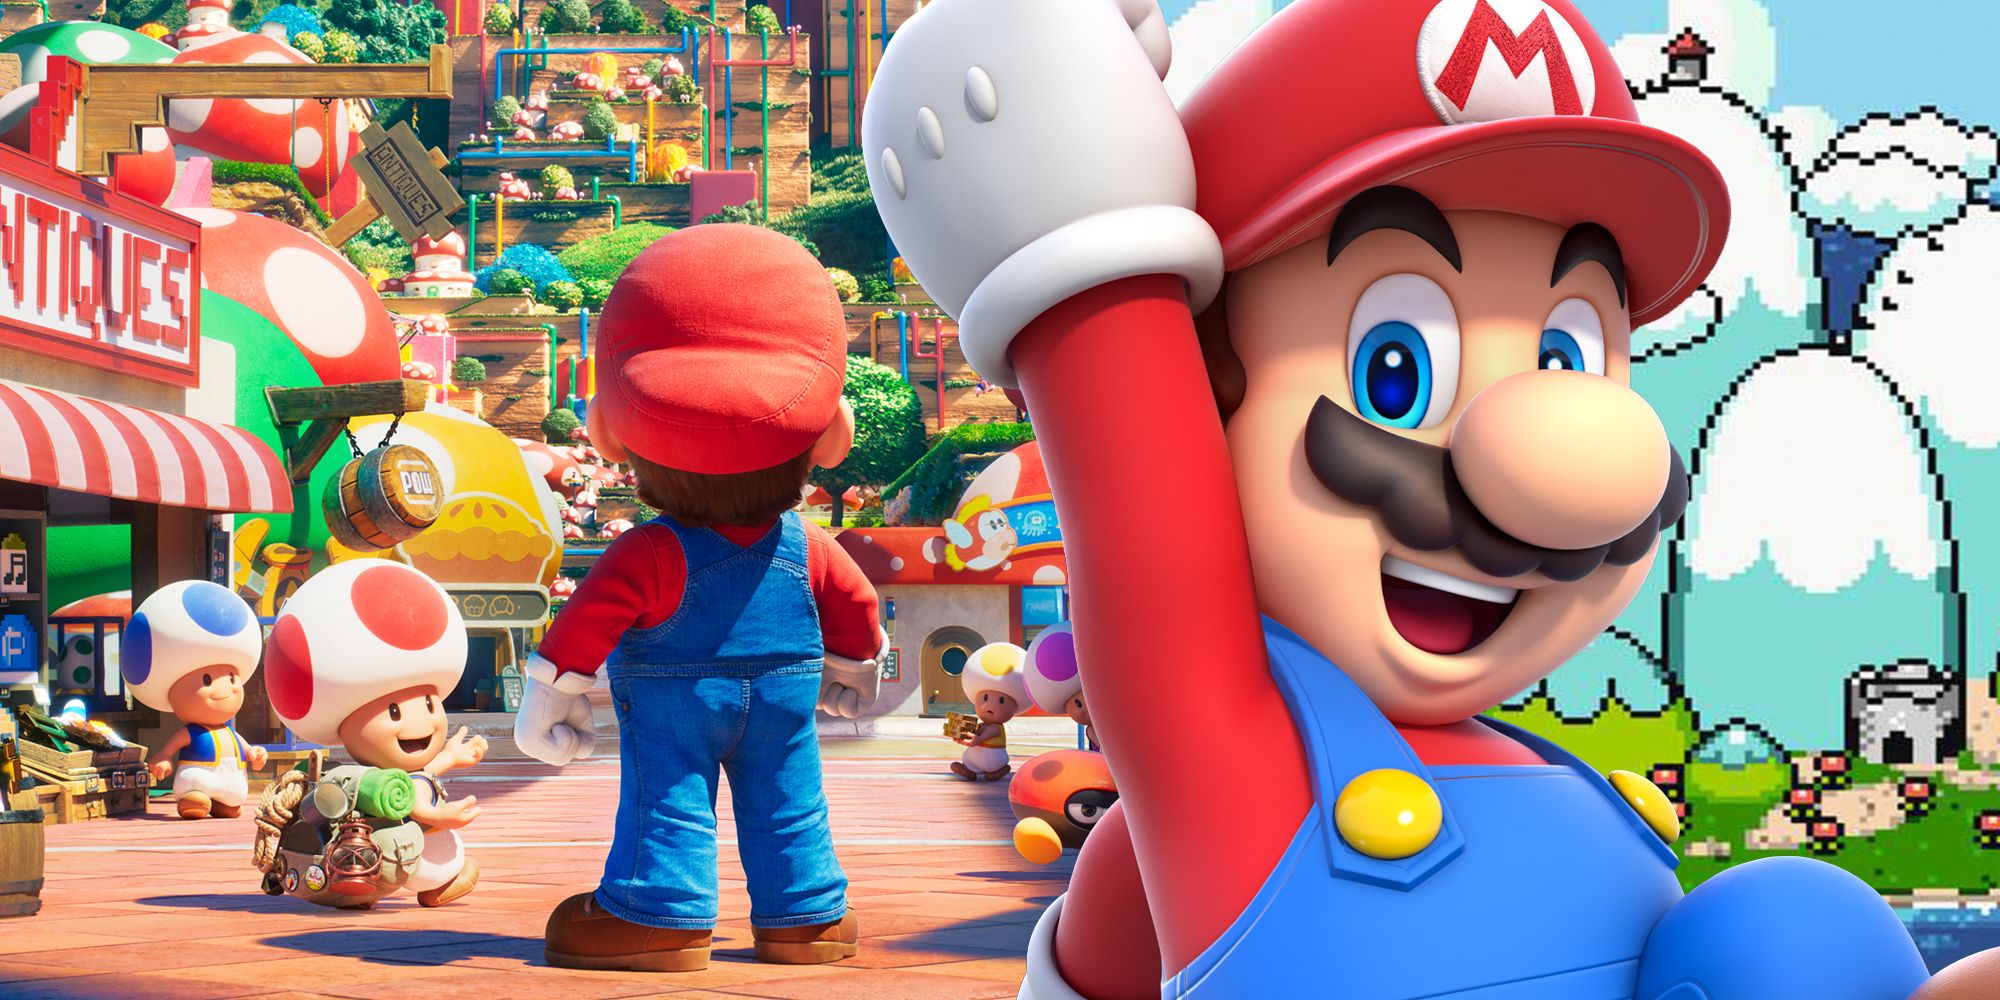 The Mario film has been delayed to 2023